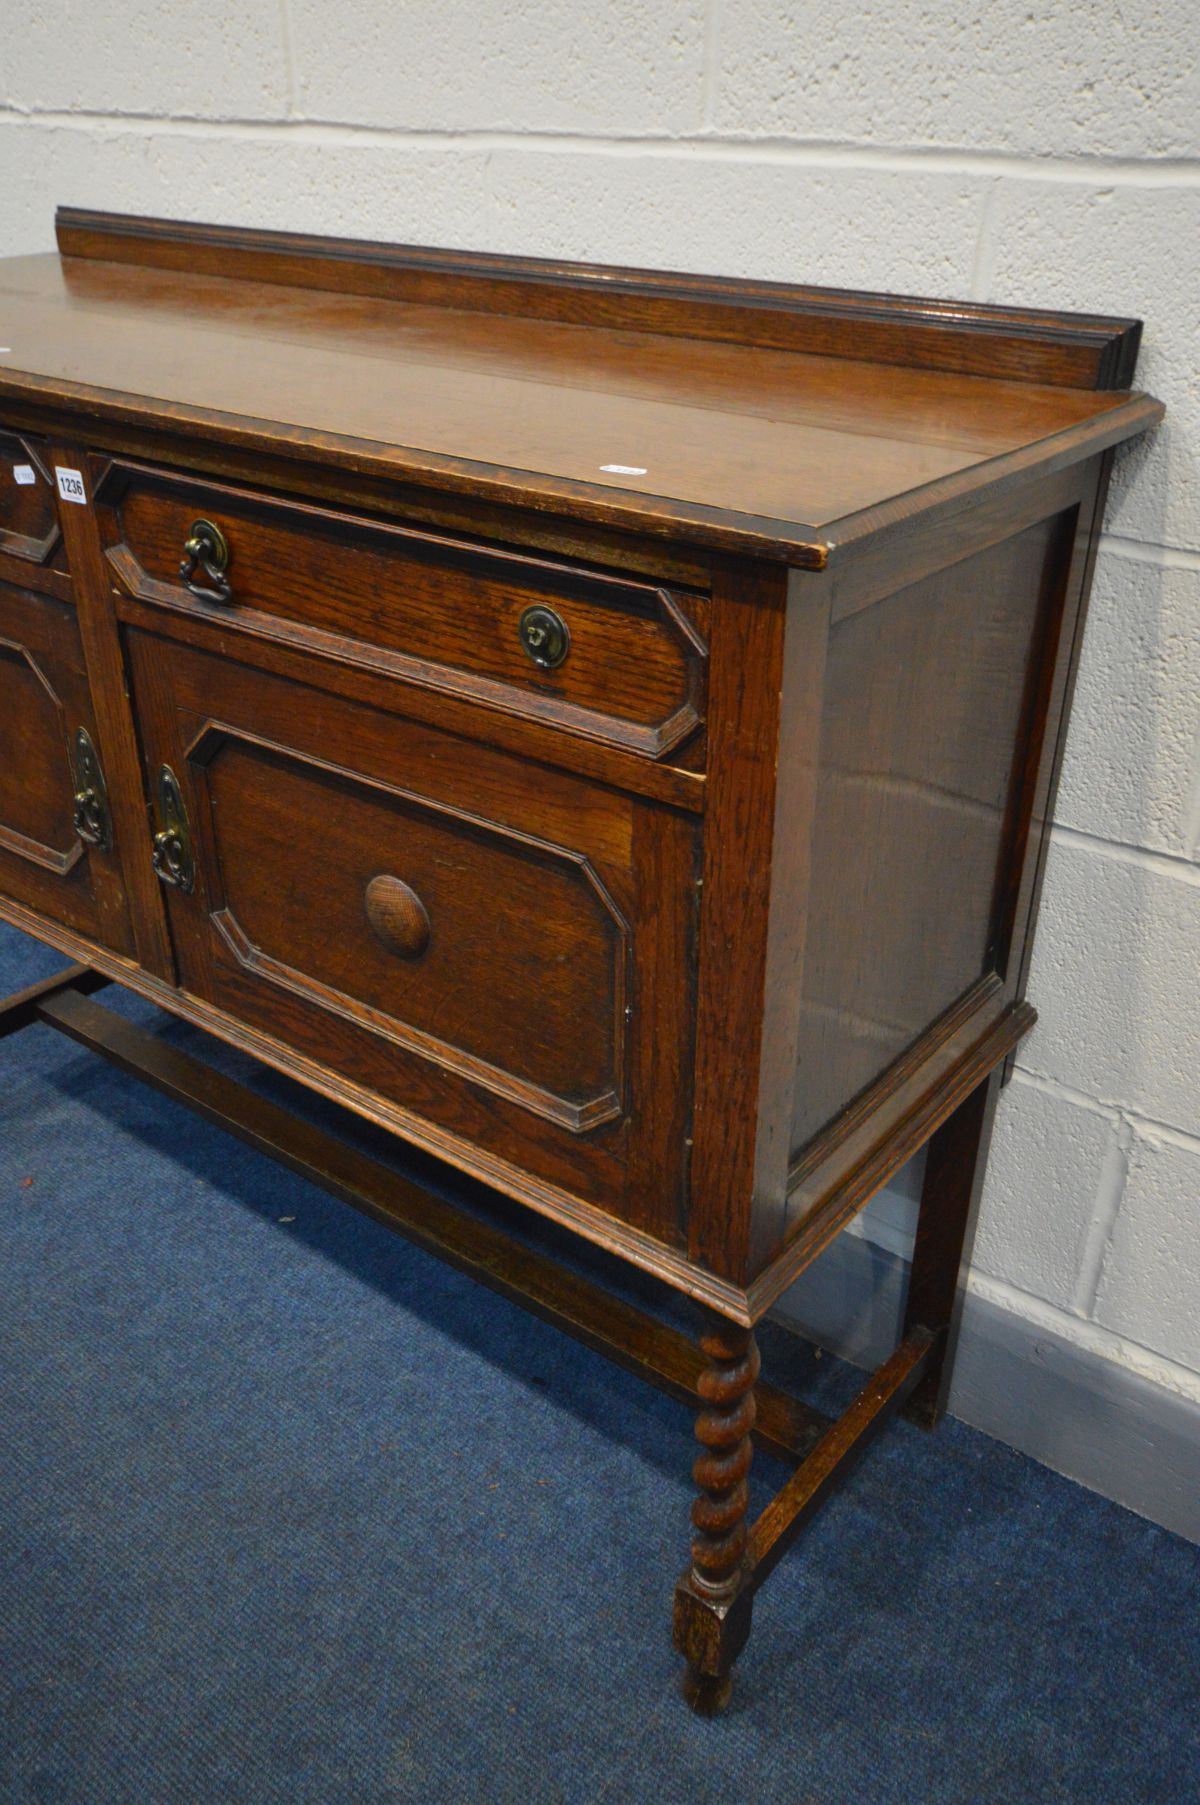 AN EARLY 20TH CENTURY OAK SIDEBOARD, two drawers above two cupboard doors, barley twist front - Image 2 of 2